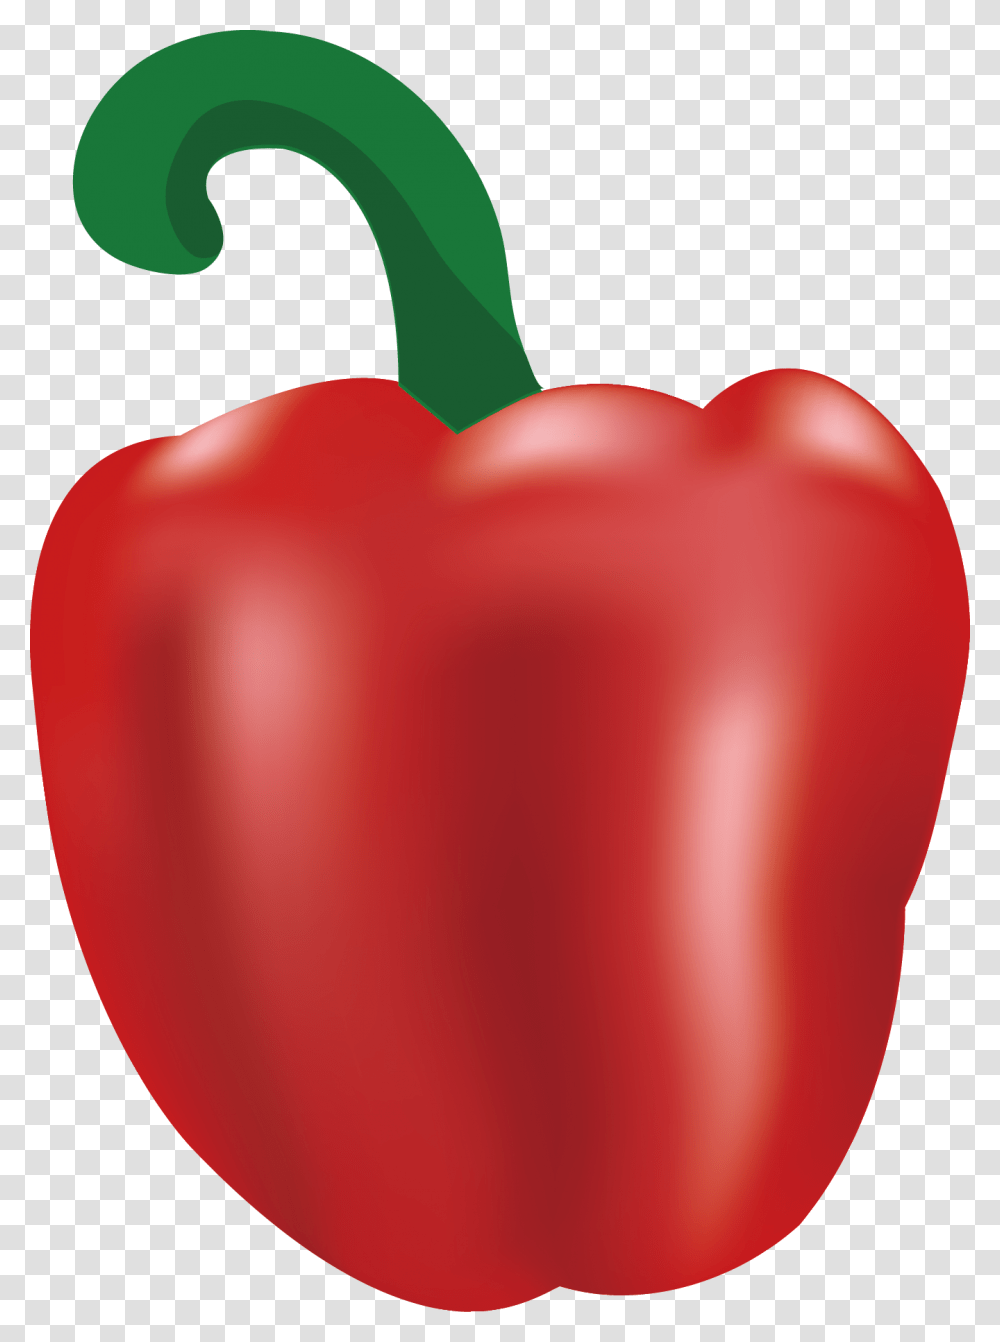 Chili Pepper Bell Pepper Vegetable Illustration, Plant, Balloon, Food, Produce Transparent Png